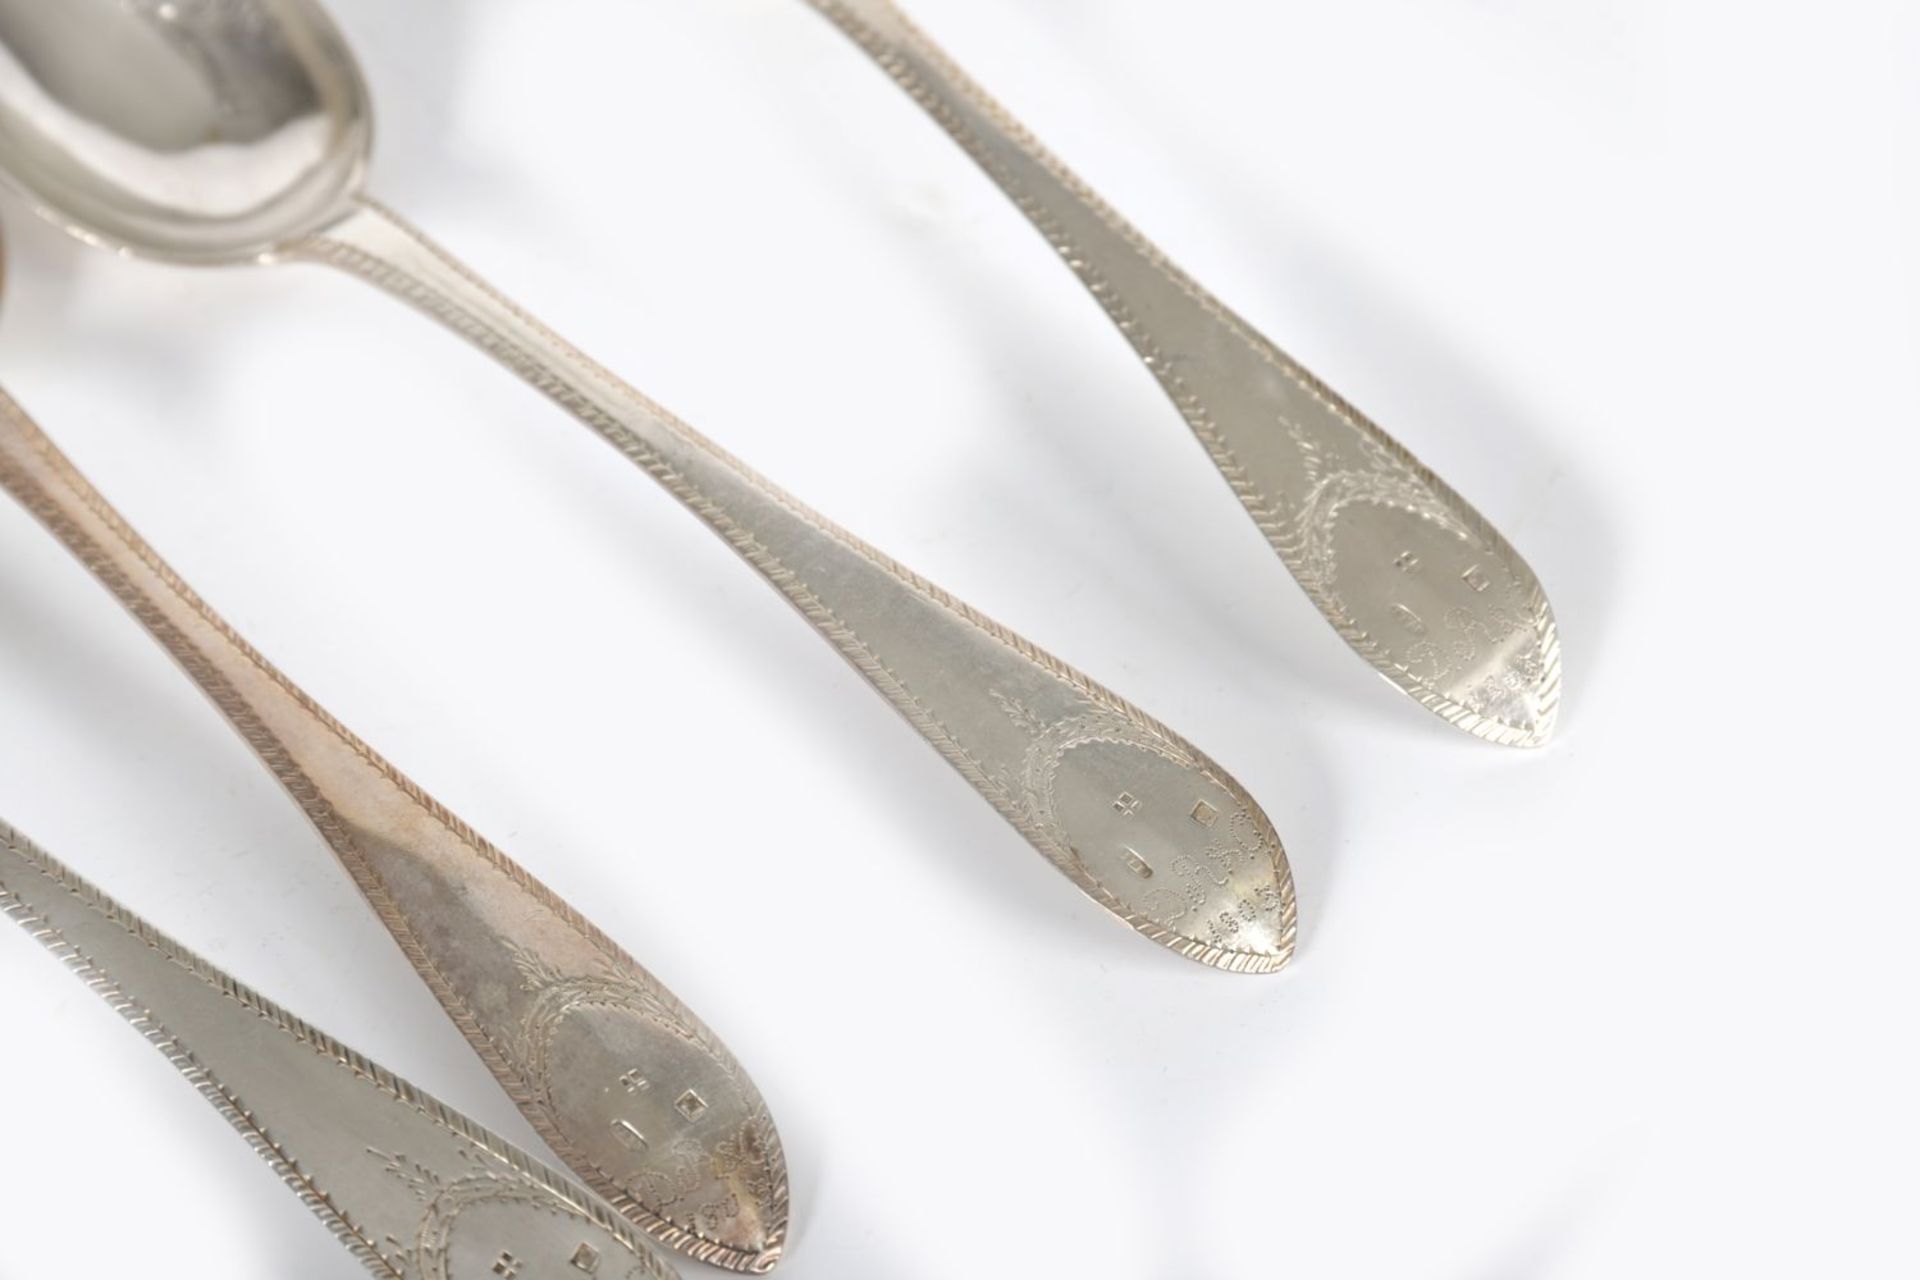 SET OF 4 18TH-CENTURY SILVER SERVING SPOONS - Image 2 of 3